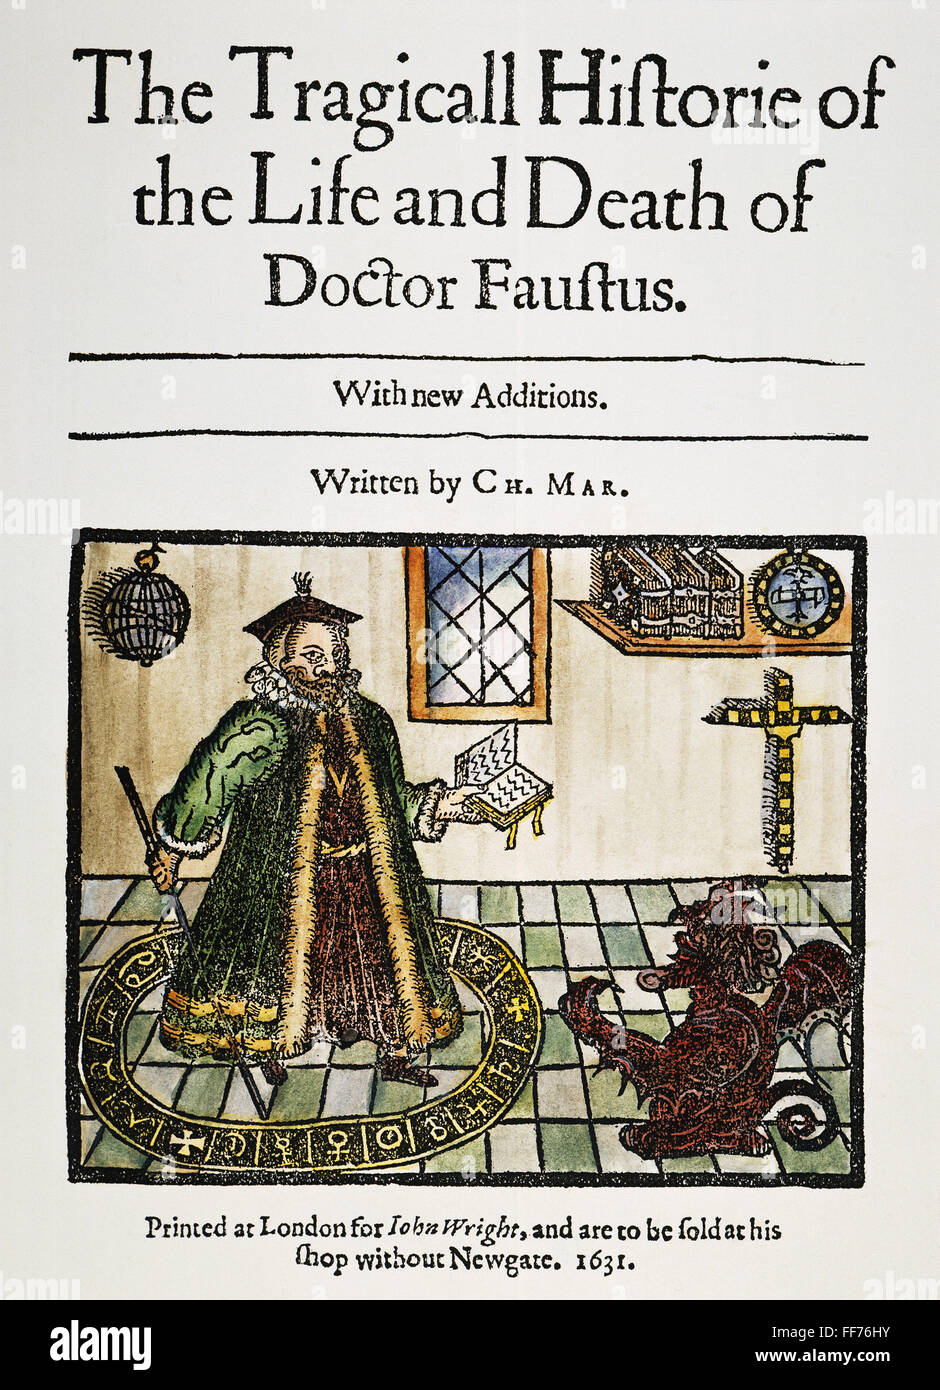 MARLOWES DOCTOR FAUSTUS. /nWoodcut Titelseite zur 1631 Ausgabe Christopher Marlowes "The Tragicall Historie of the Life and Death of Doctor Faustus." Stockfoto